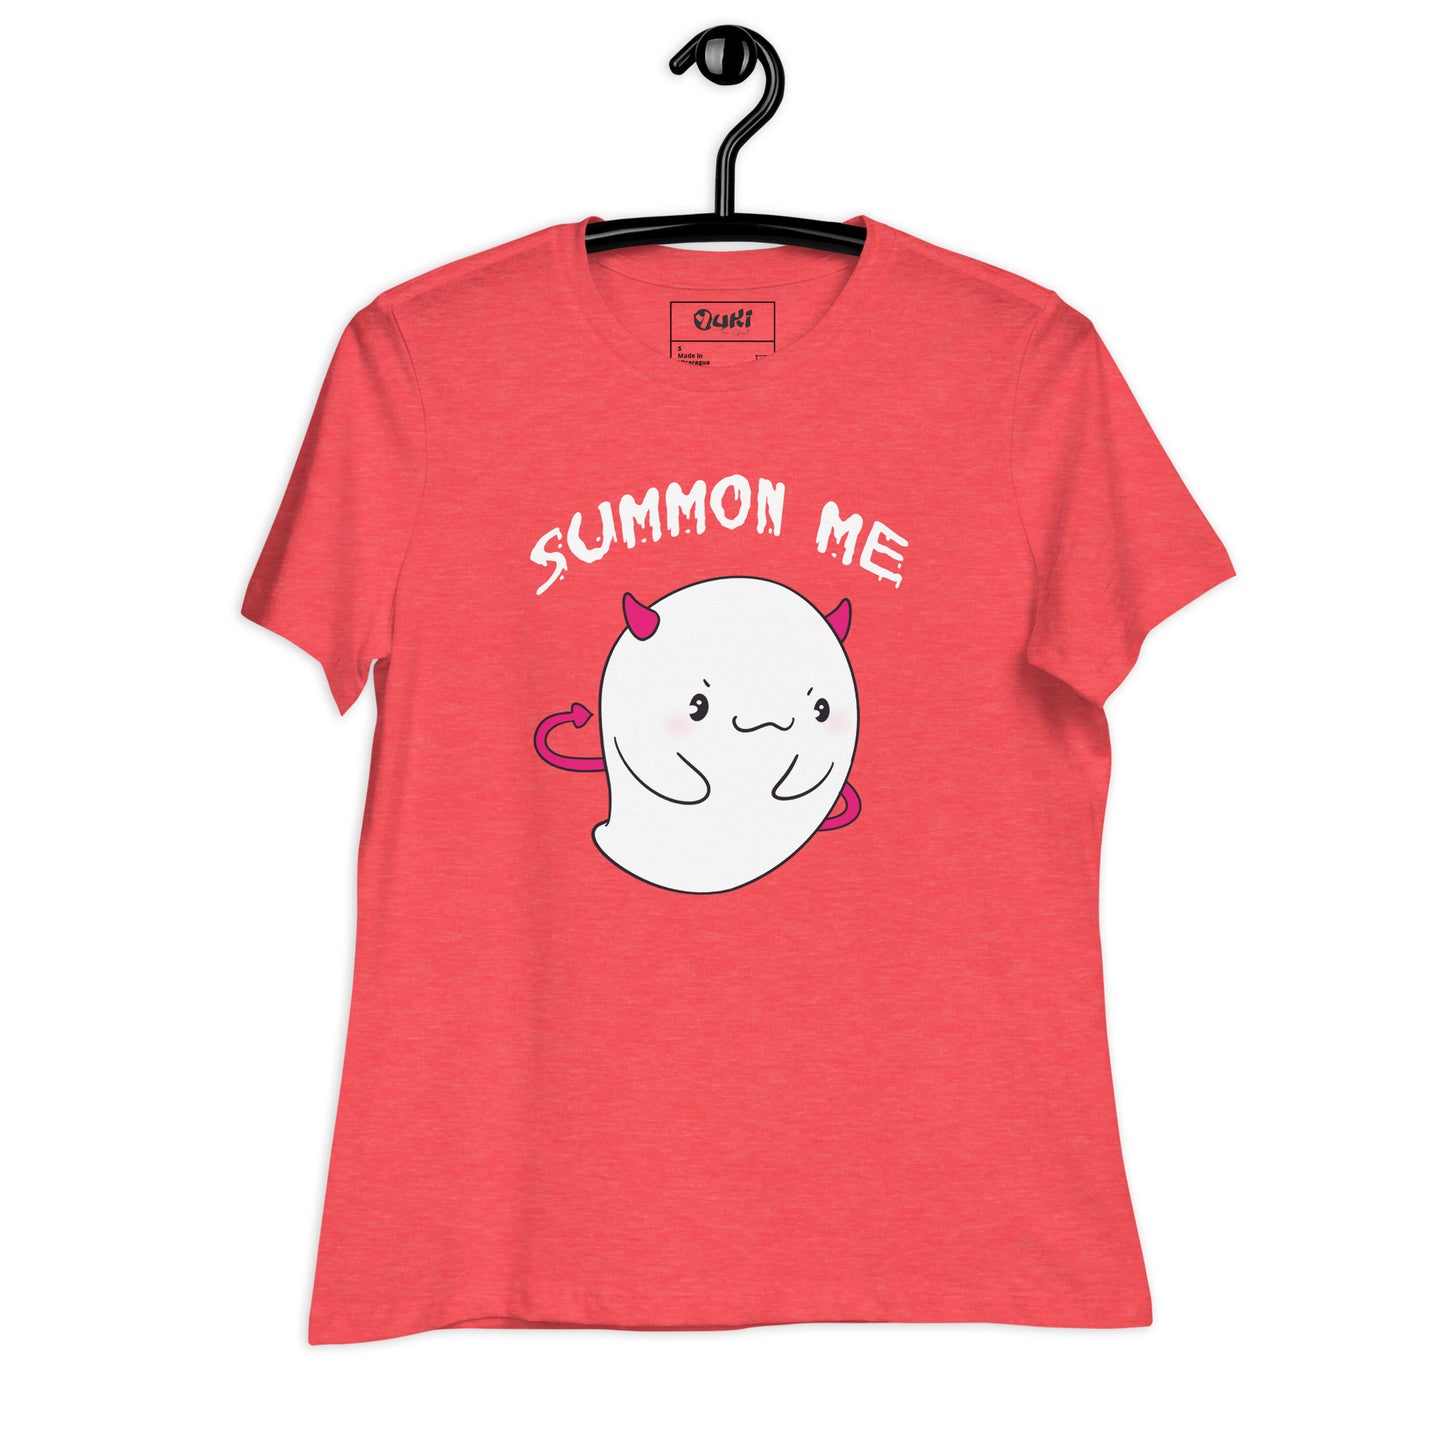 Summon me - Women's Relaxed T-Shirt